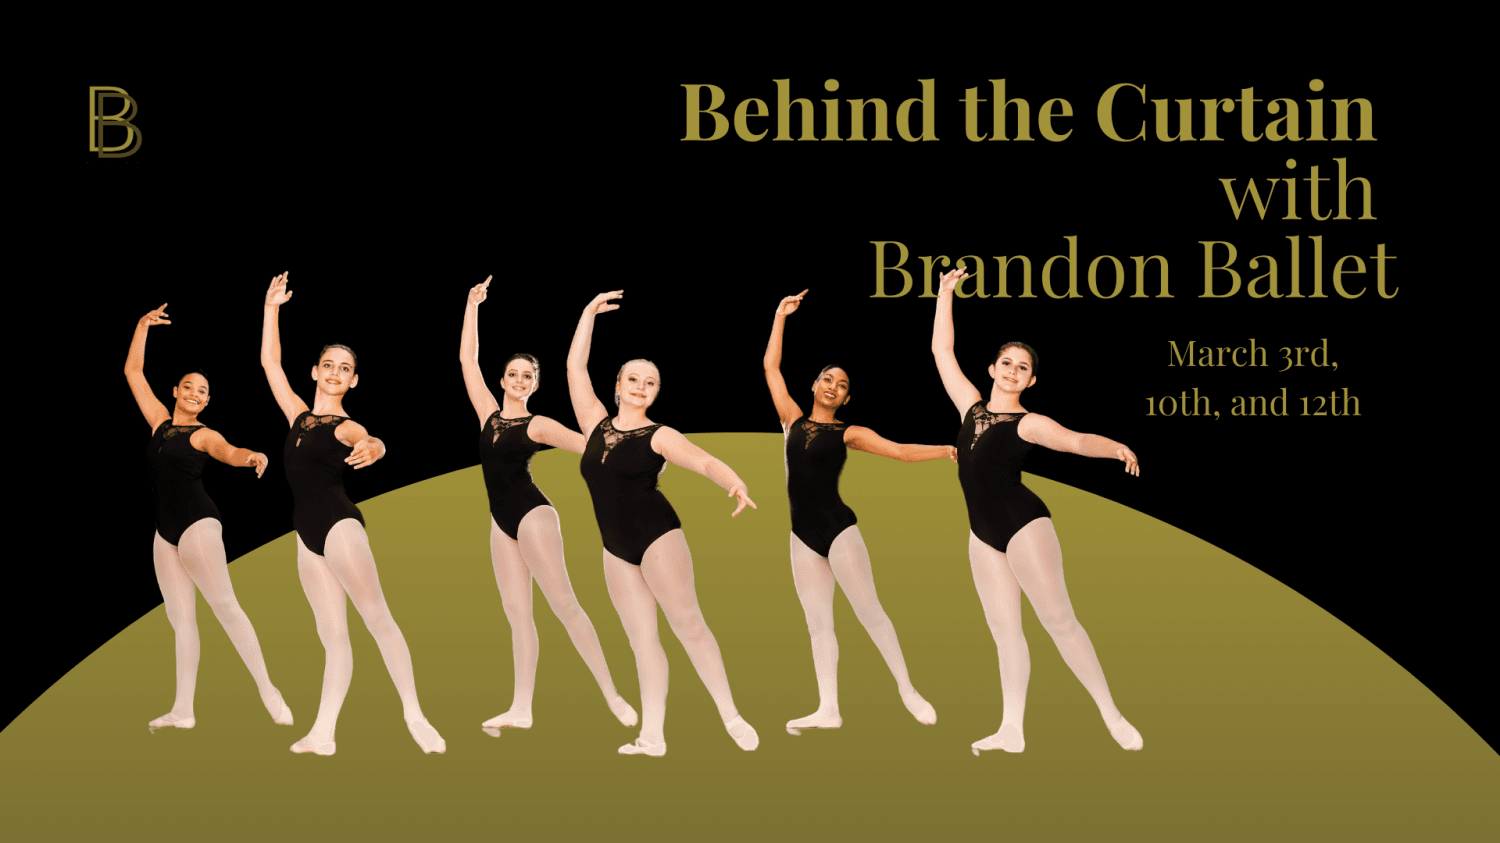 Behind the Curtain with Brandon Ballet